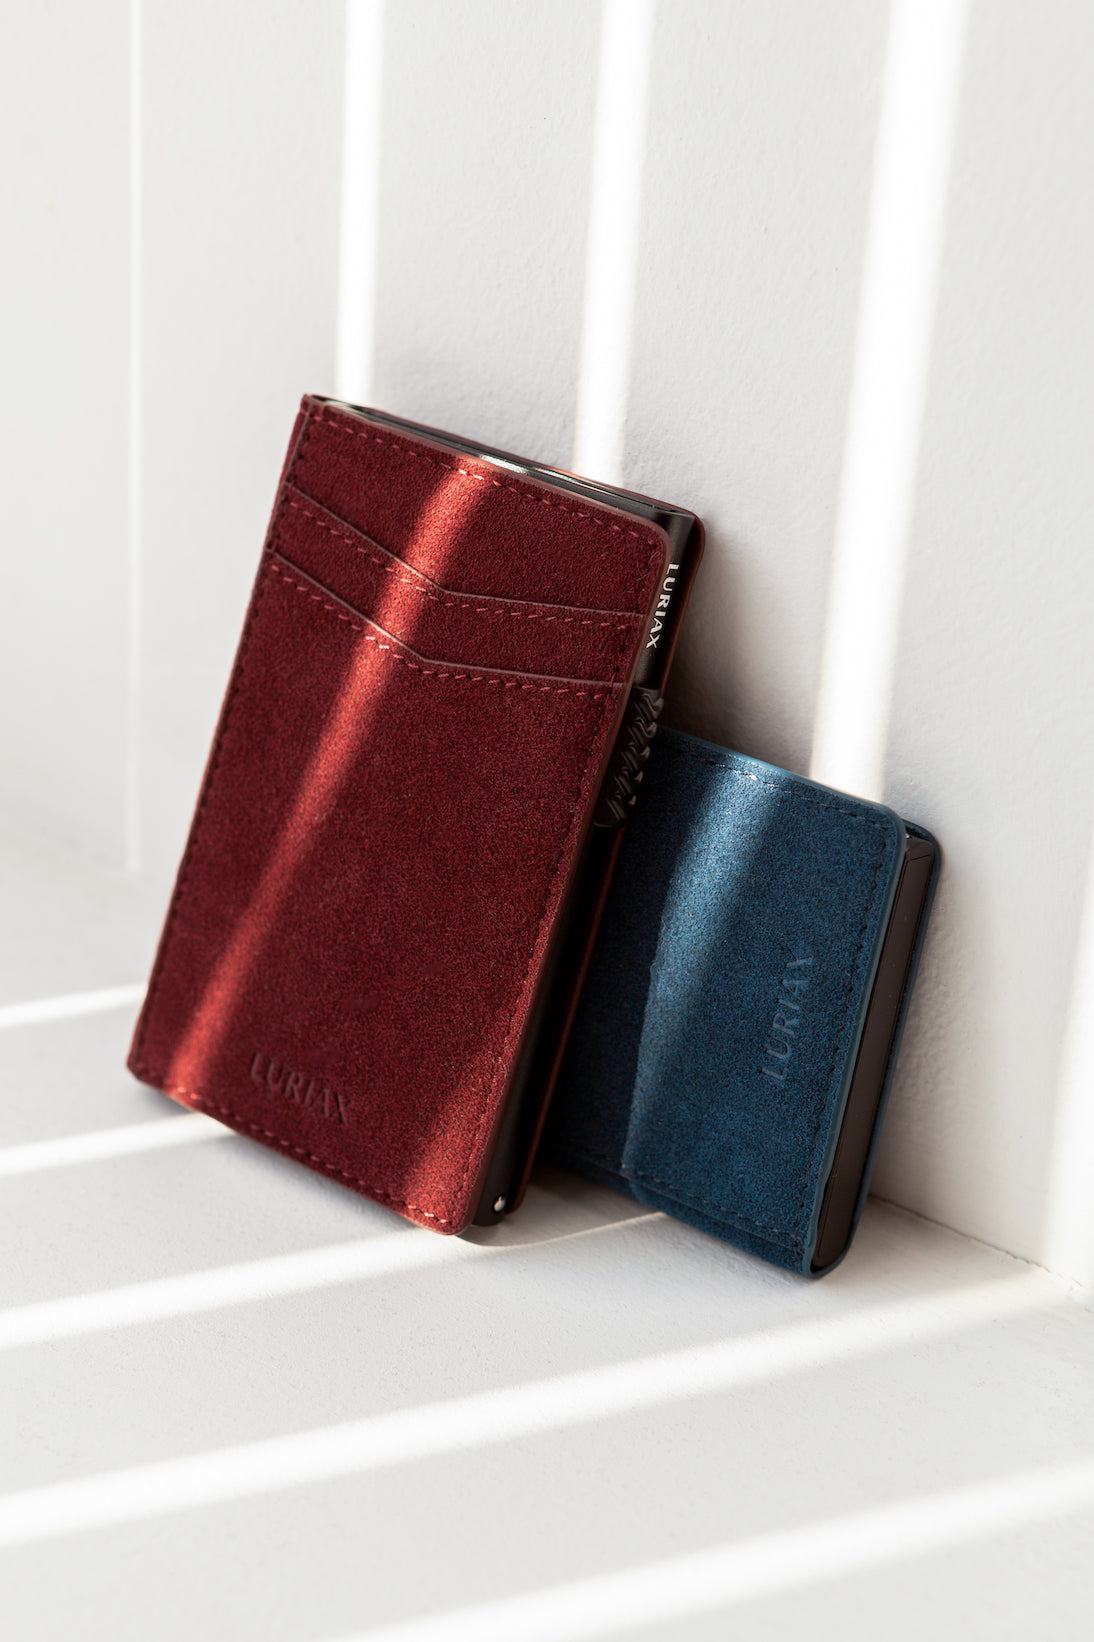 The Bifold Cardholder - Alcantara Suede Luriax Wallet